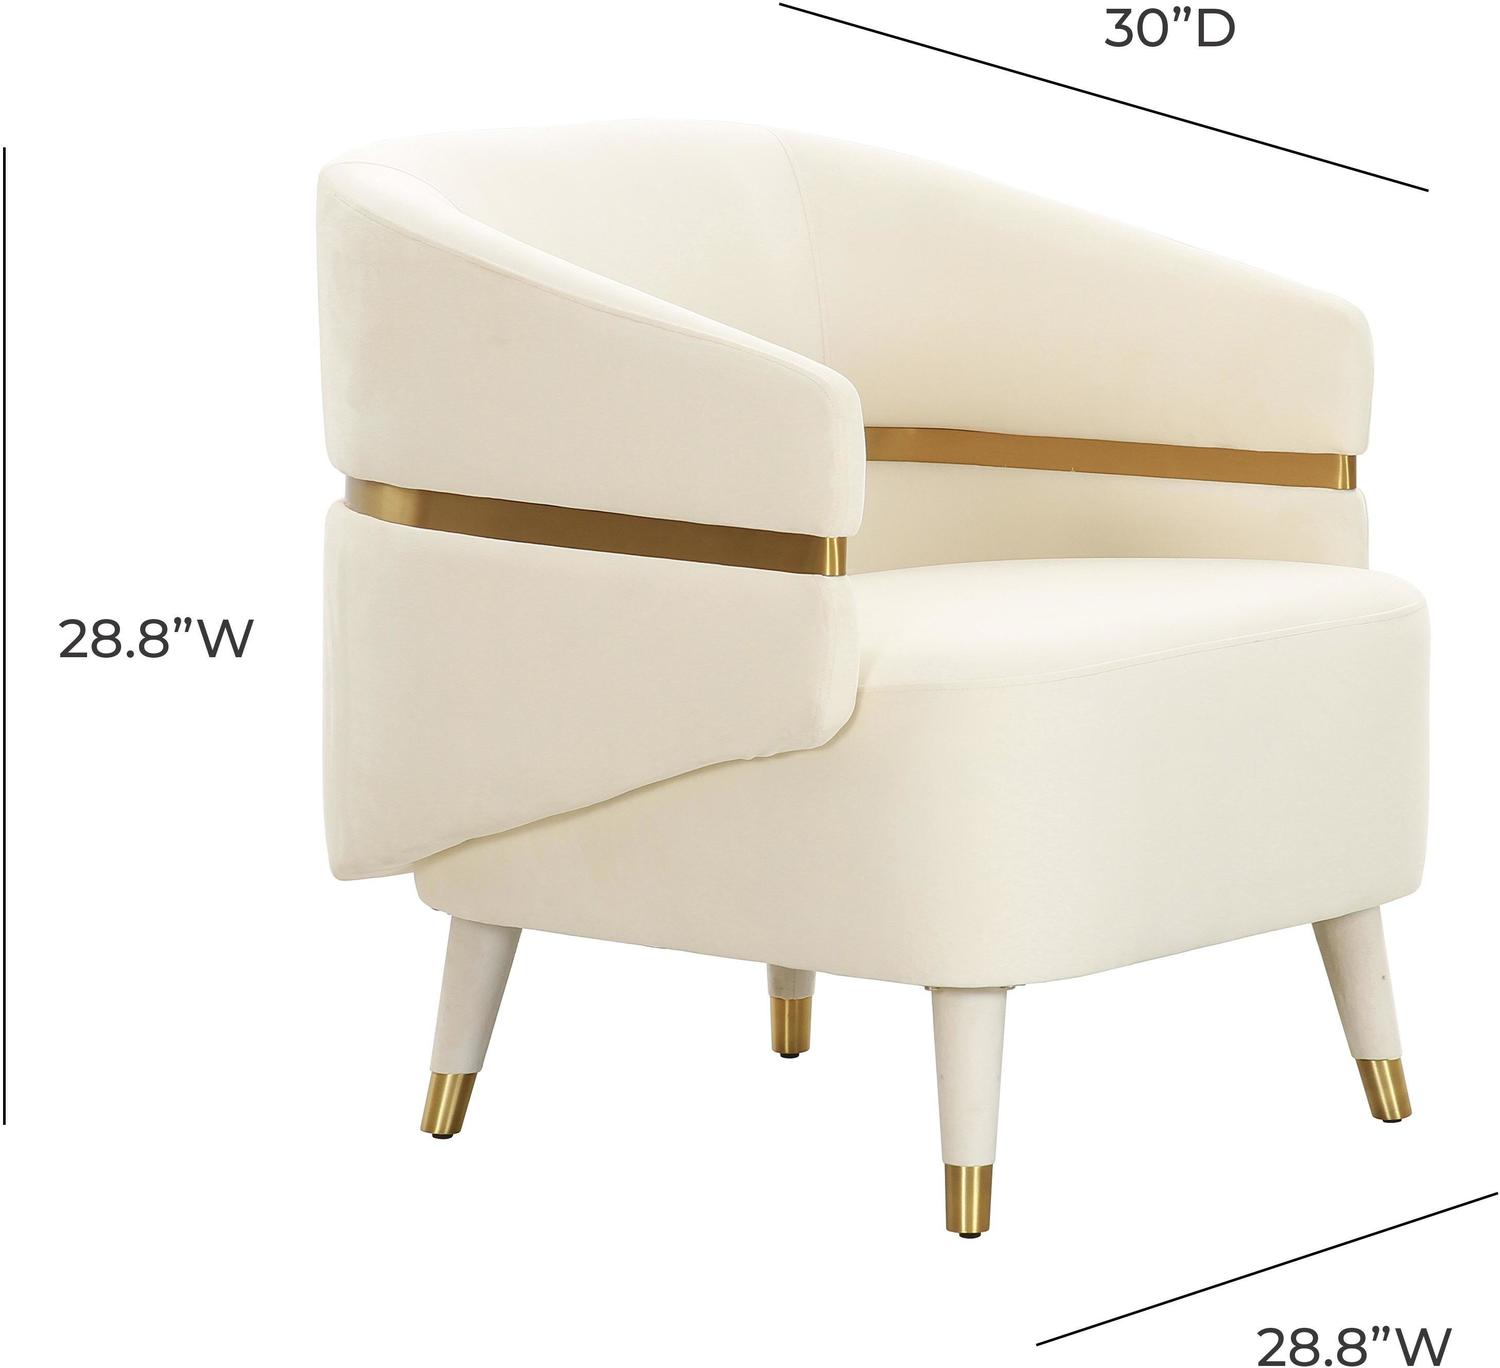 lounger design Tov Furniture Accent Chairs Chairs Cream